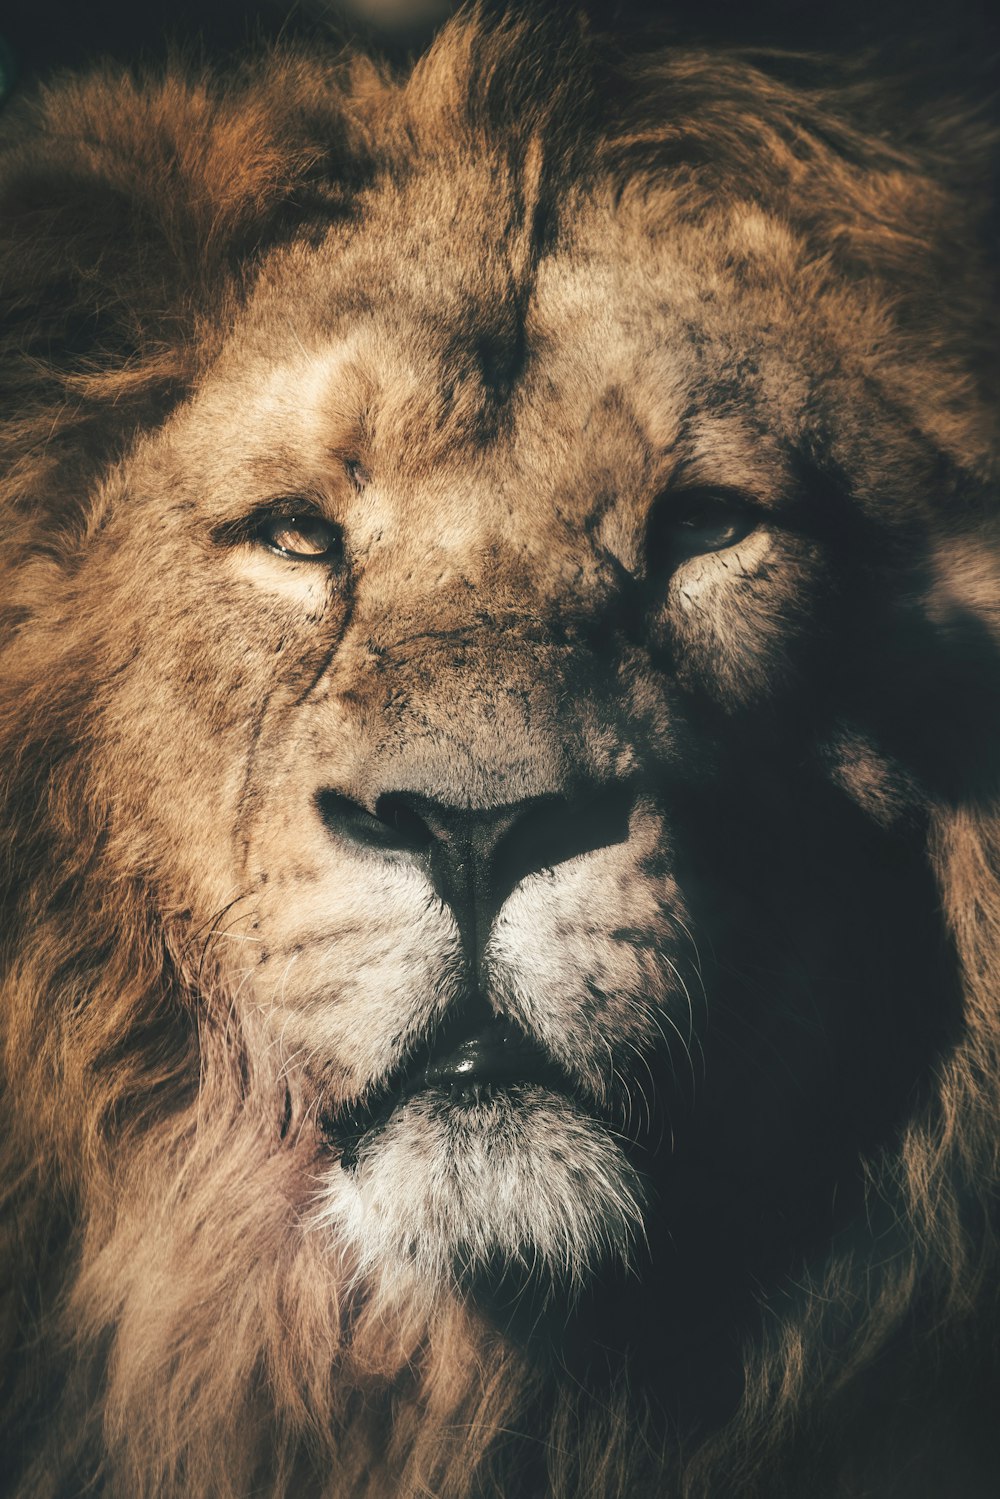 a close up of a lion's face with a blurry background